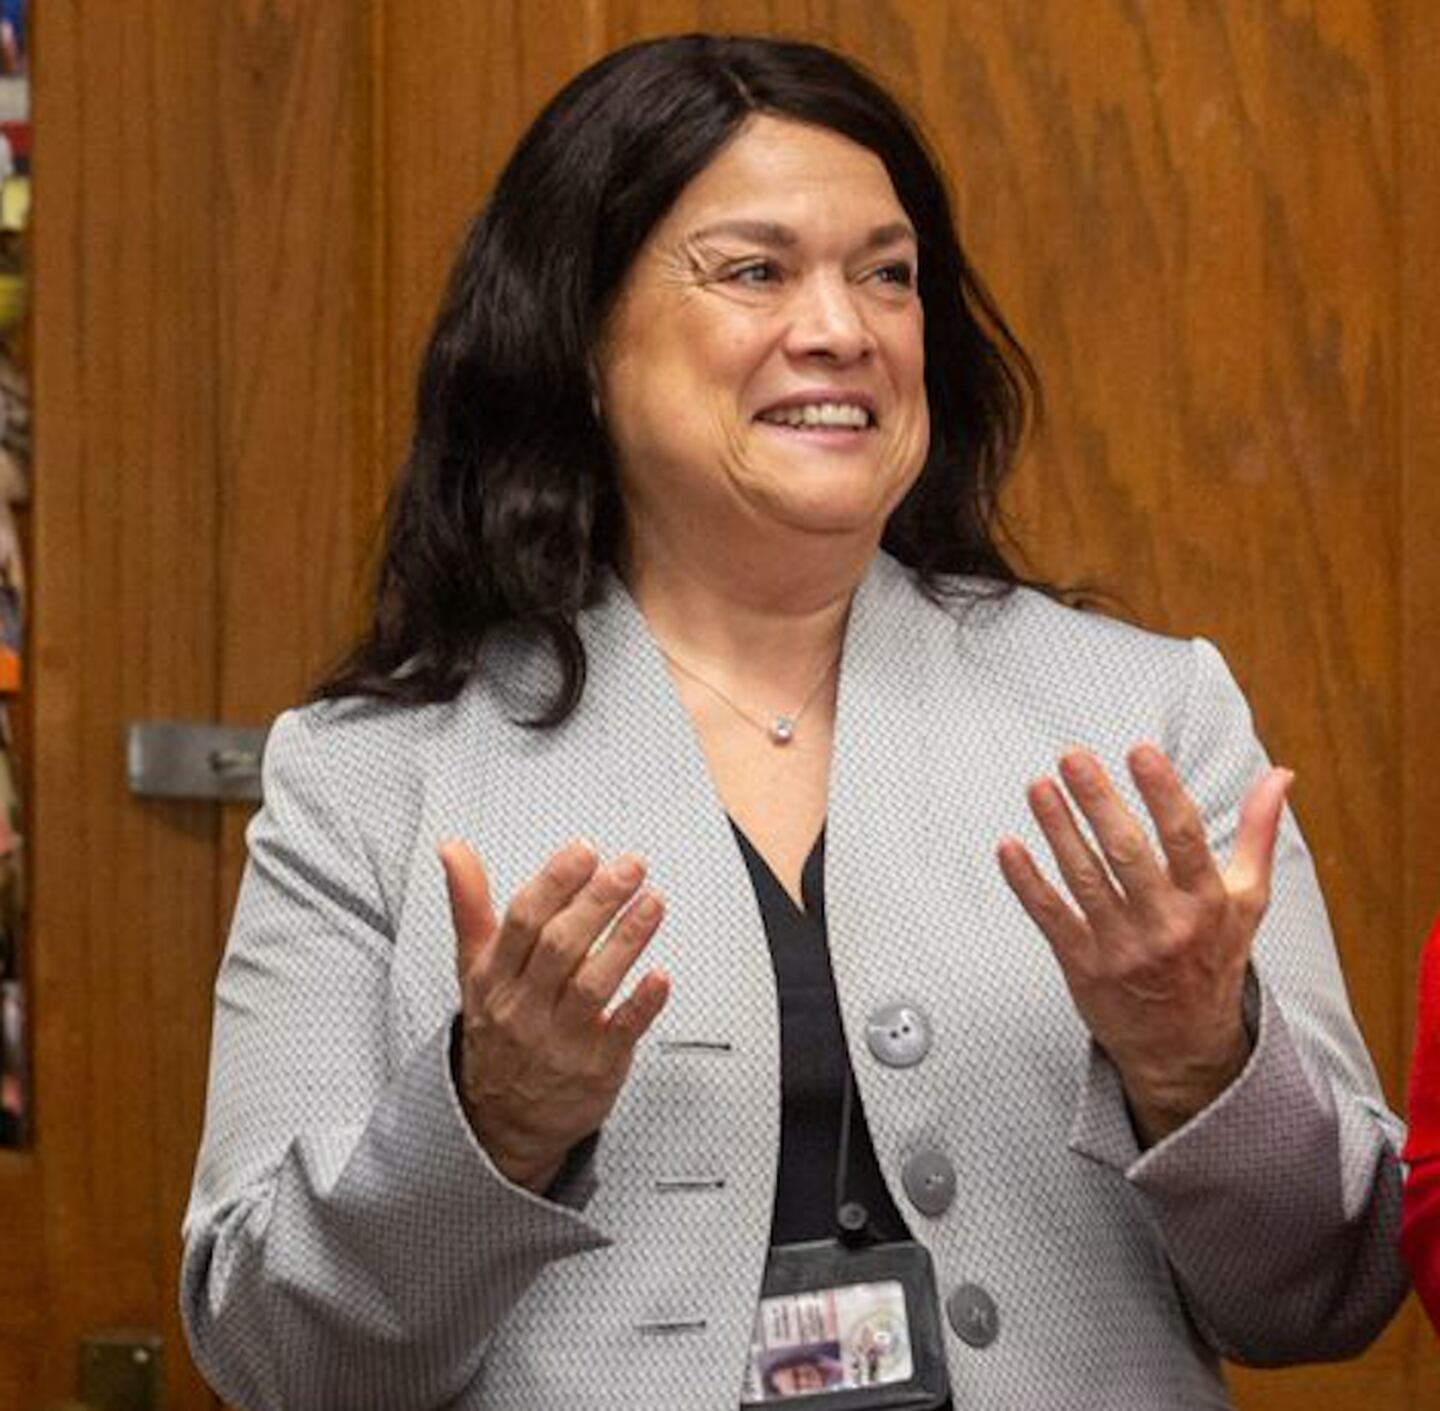 Carmen Ayala, state superintendent of schools, appears at Oregon High School on March 22 during a Teacher of the Year ceremony. She will be the featured presenter at an Education Pathways symposium April 29 at Sauk Valley Community College.